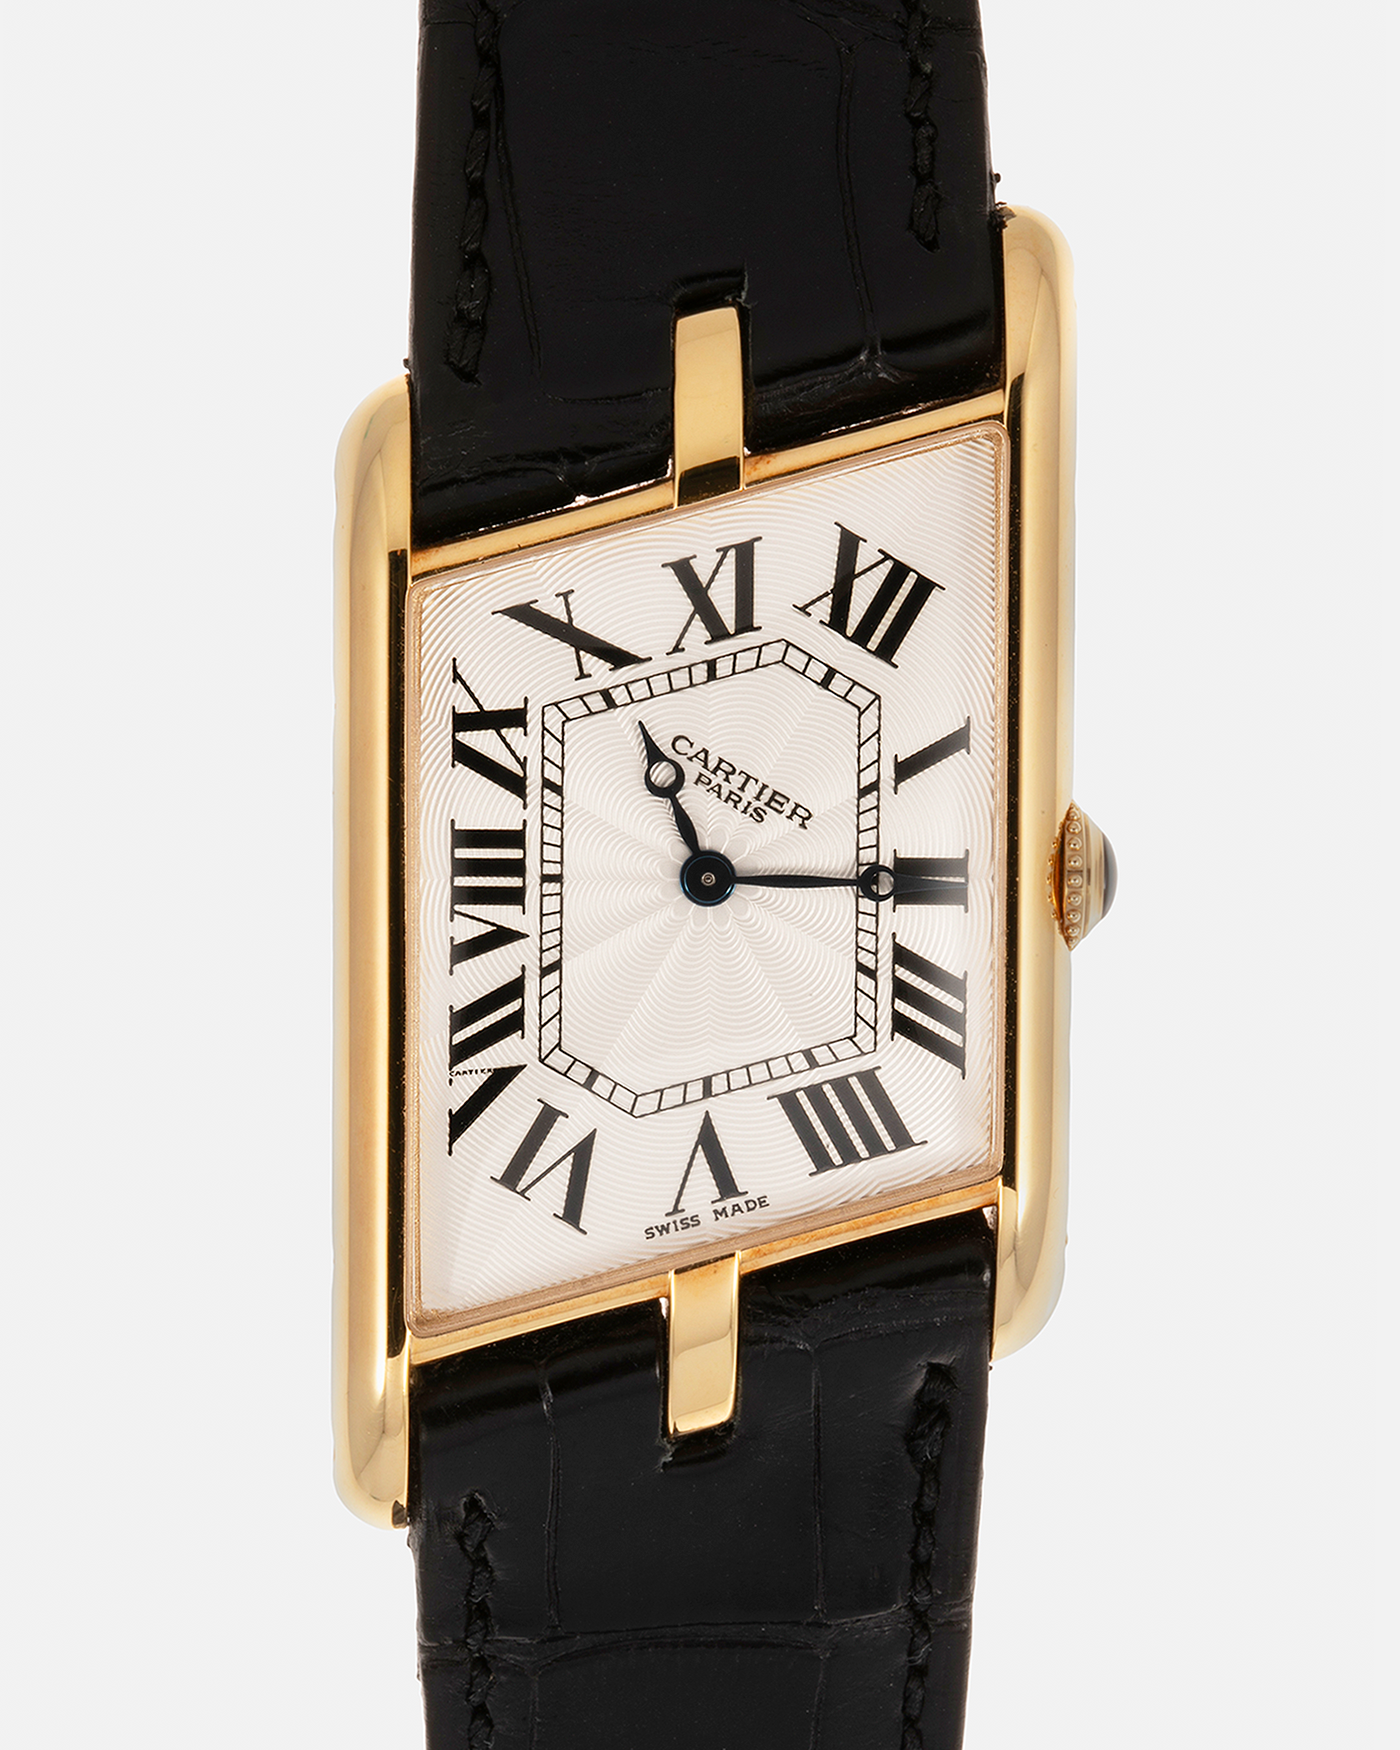 Brand: Cartier Year: 2006 Model: Tank Asymétrique CPCP, Limited Edition of 150 pieces Reference Number: 2842 Material: 18-carat Yellow Gold Movement: Cartier Cal. 9770 MC, Manual-Winding Case Diameter: 26.5mm x 41mm x 7.5mm Strap: Cartier Black Alligator Leather with Signed 18-carat Yellow Gold Deployant Clasp